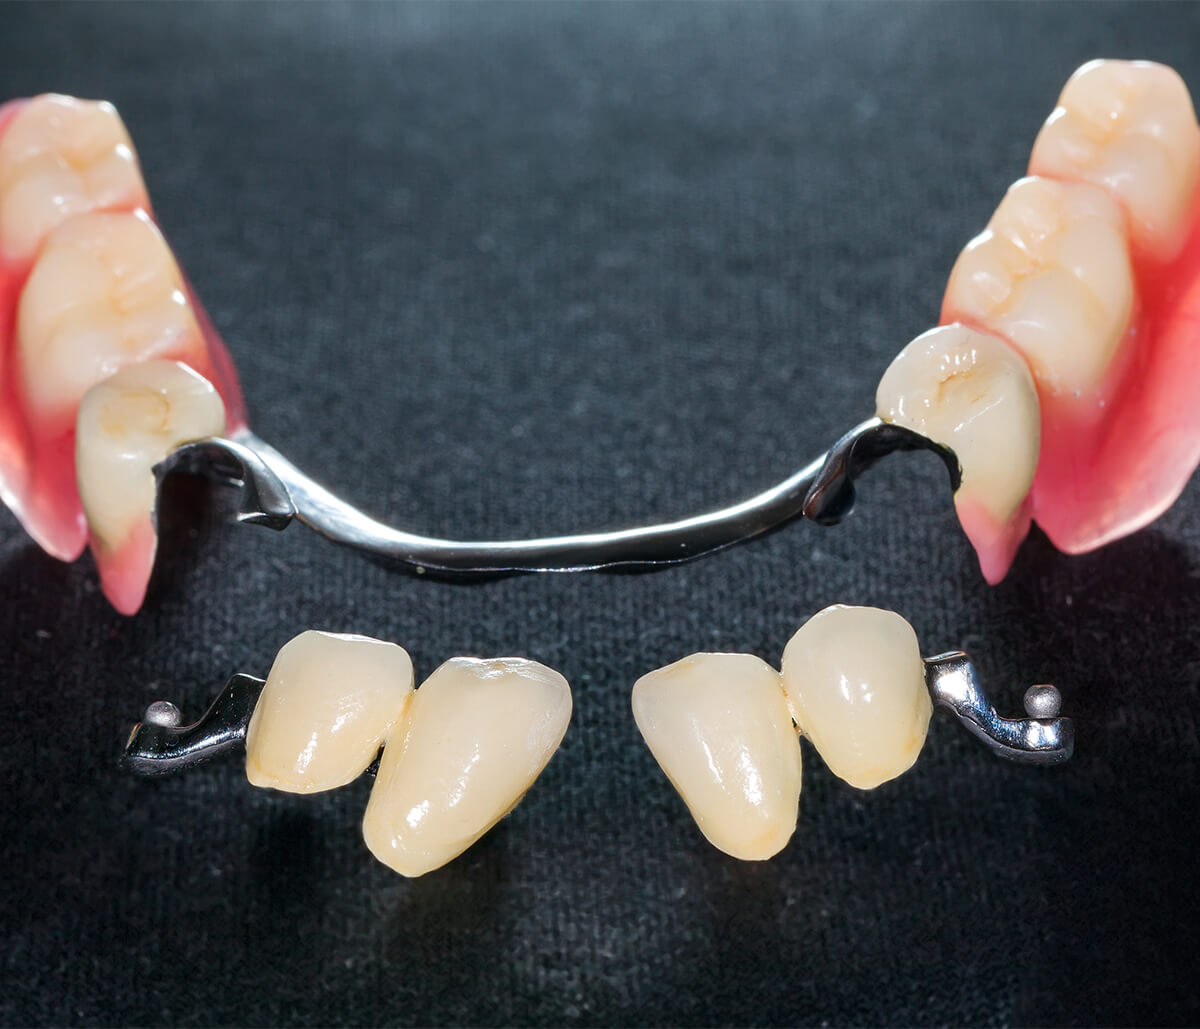 Removable Partial Denture in Houston TX Area